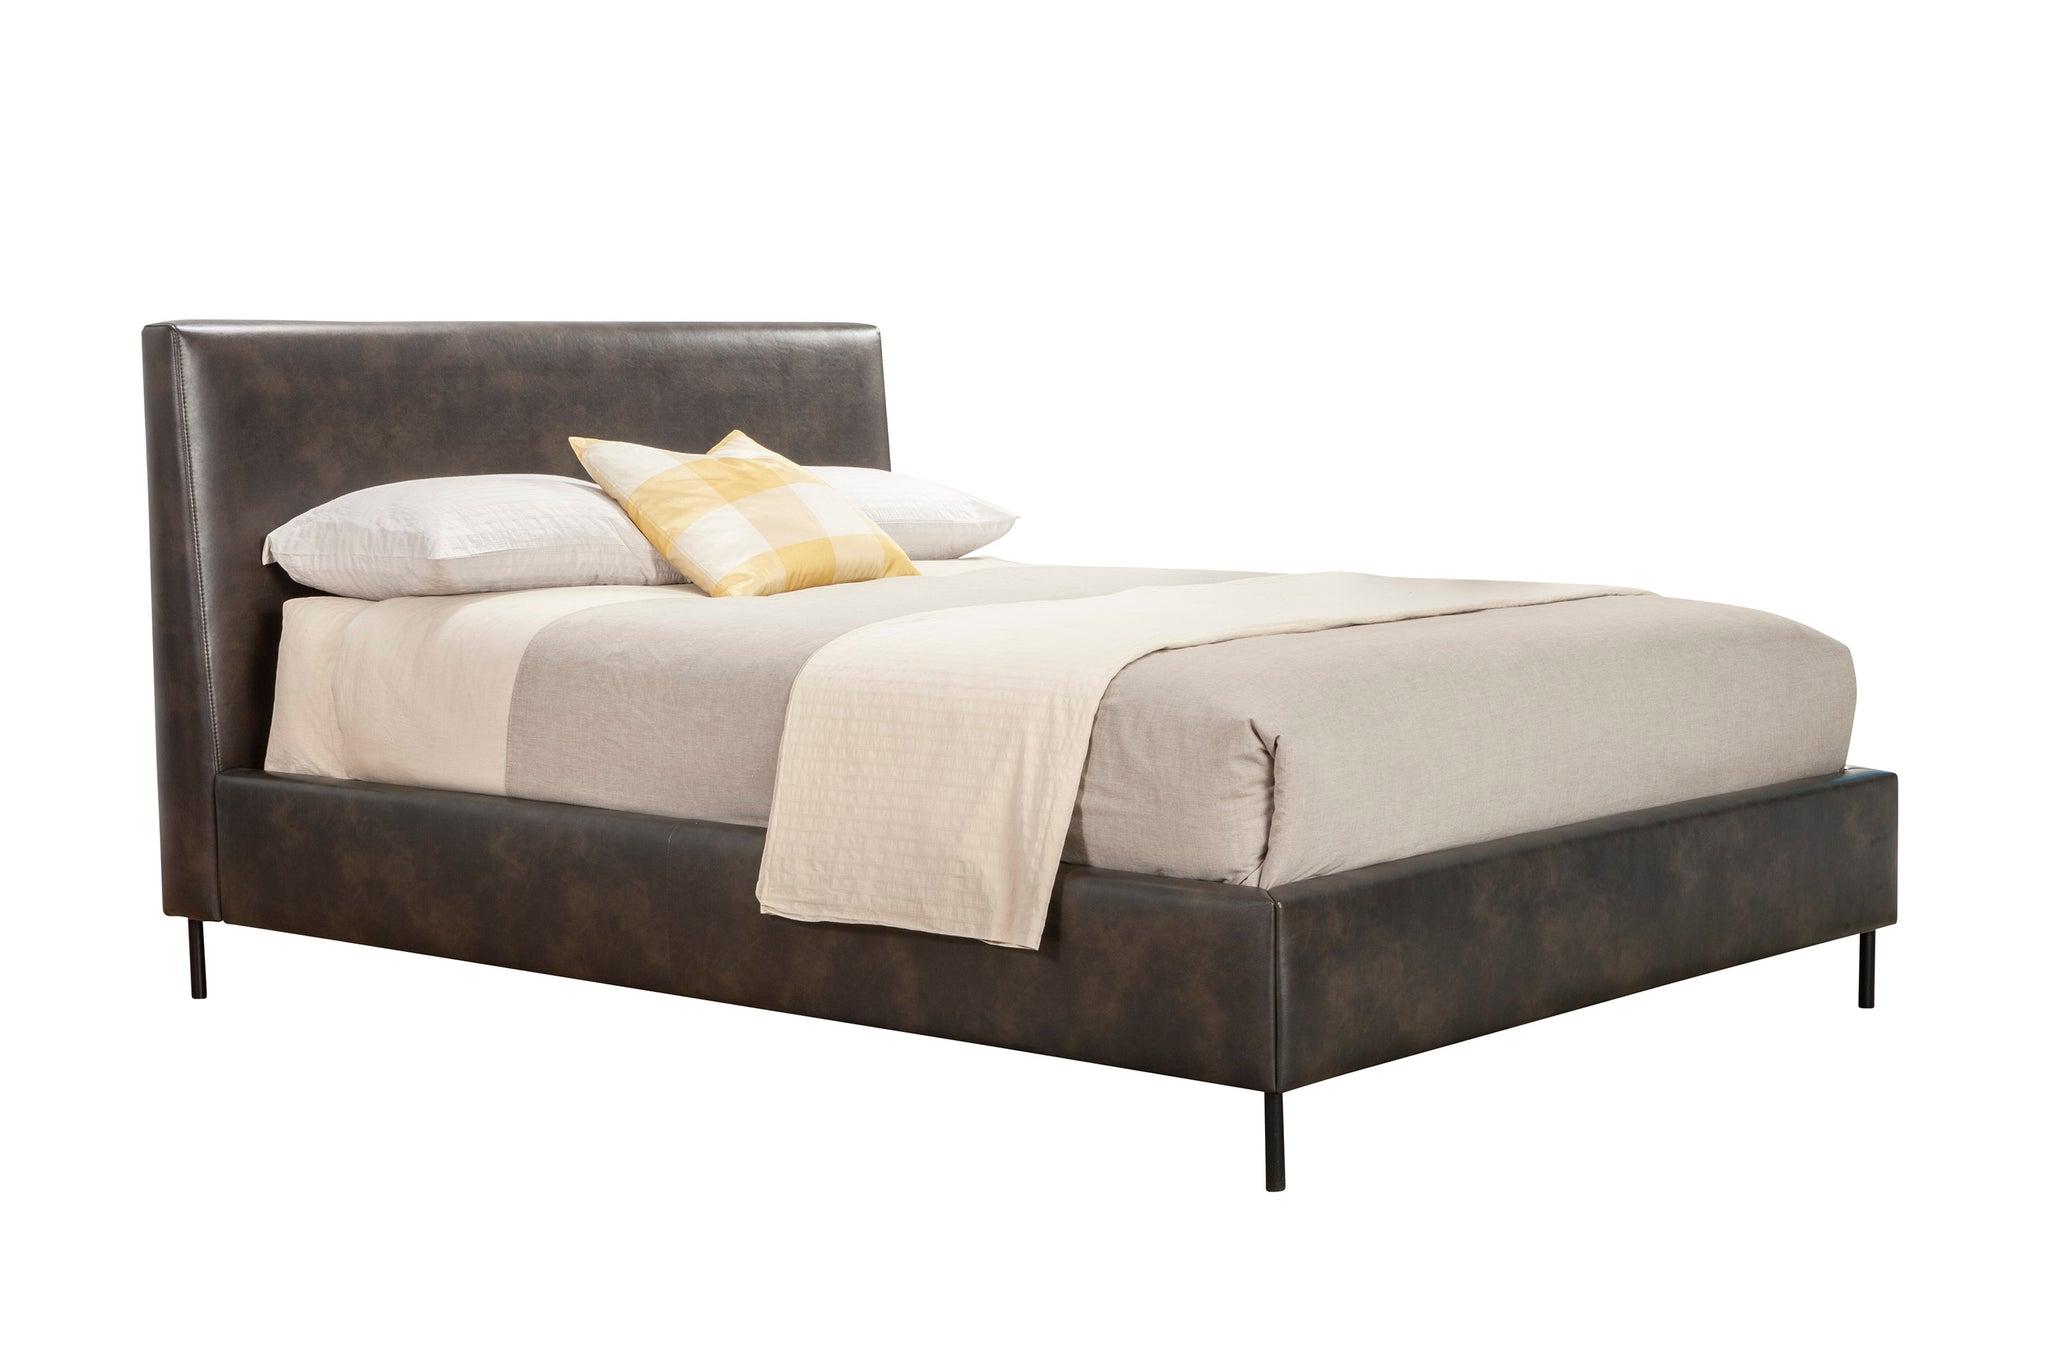 Modern Platform Bed SOPHIA 6902F-GRY in Gray Faux Leather